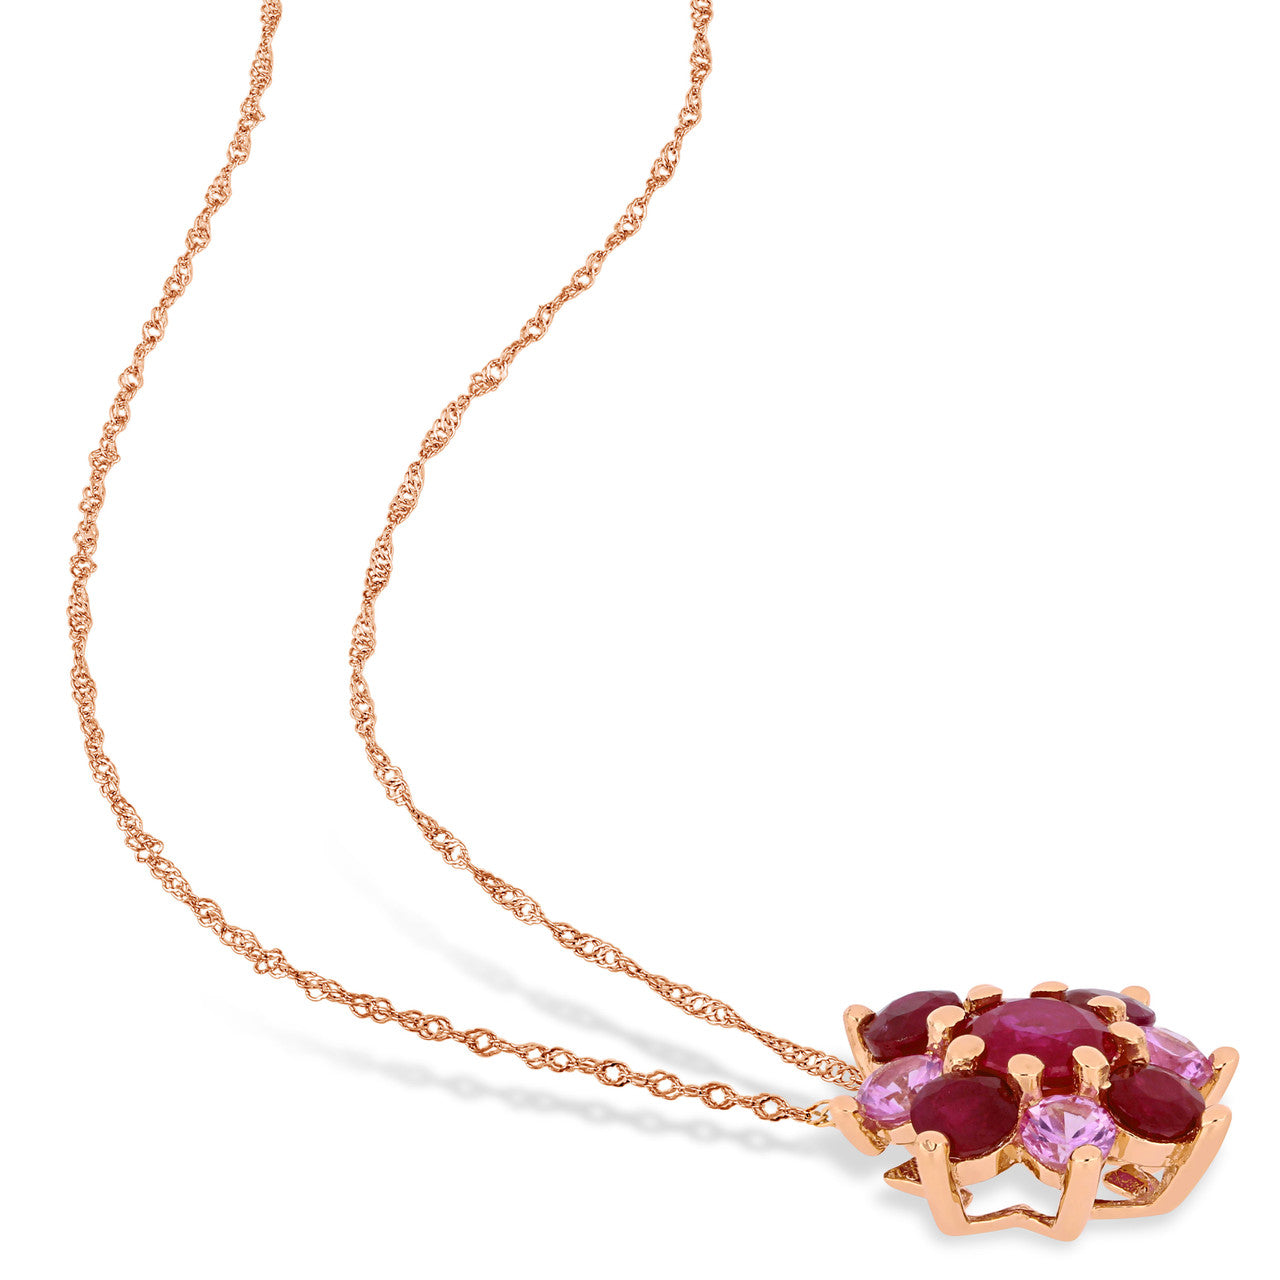 Ice Jewellery 1 4/5 CT TGW Ruby-CN Ruby Pink Sapphire Fashion Pendant With Chain in 14k Pink Gold - 75000004895 | Ice Jewellery Australia